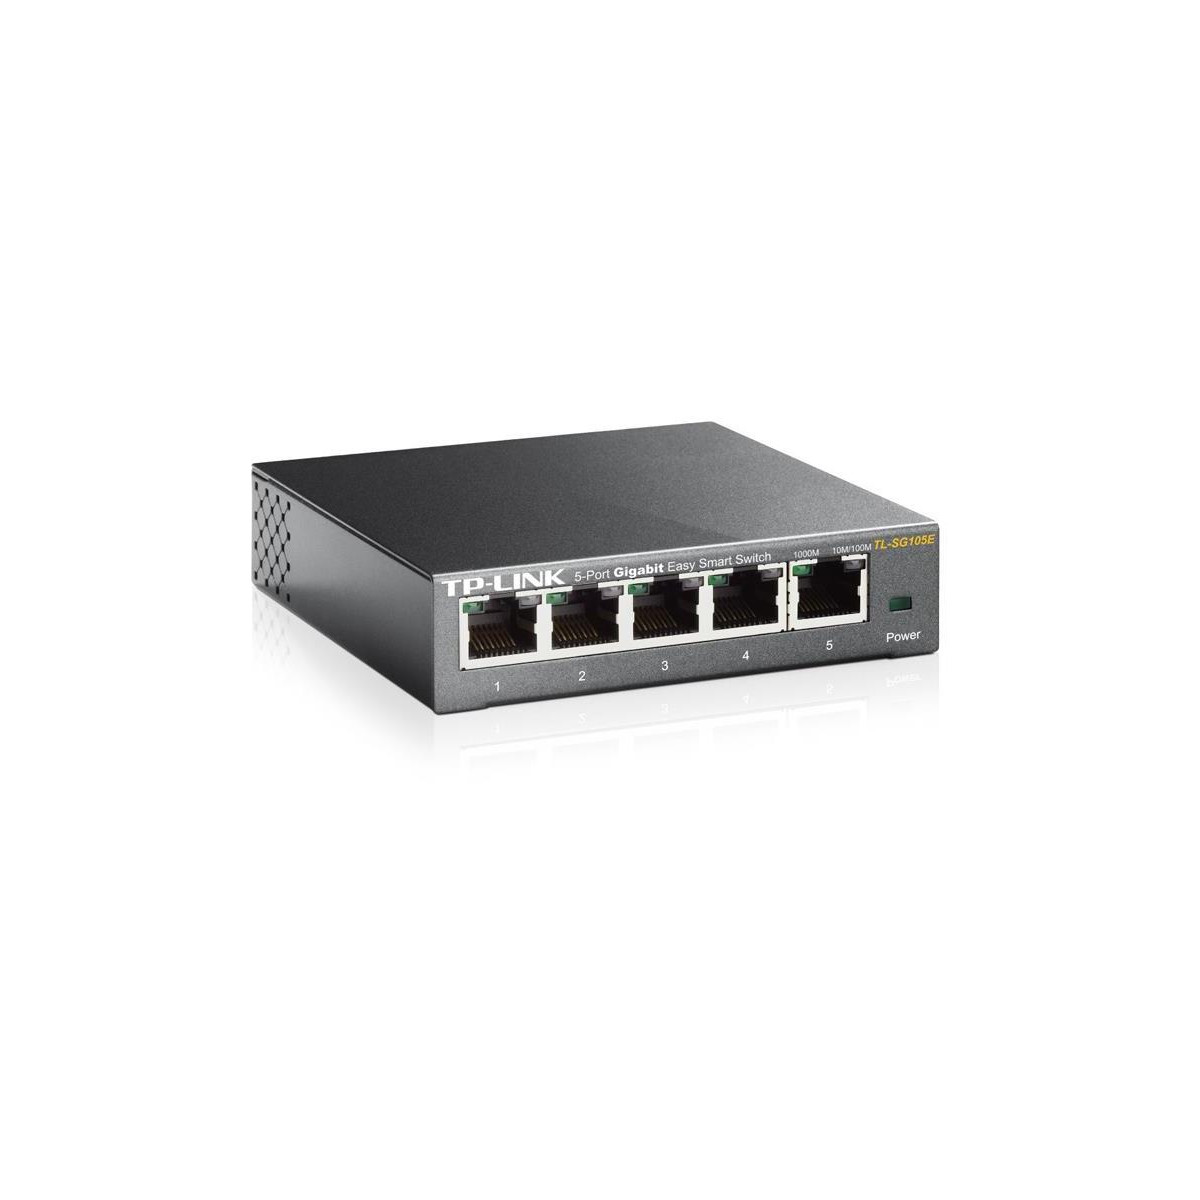 More about Switch TP-LINK TL-SG105E